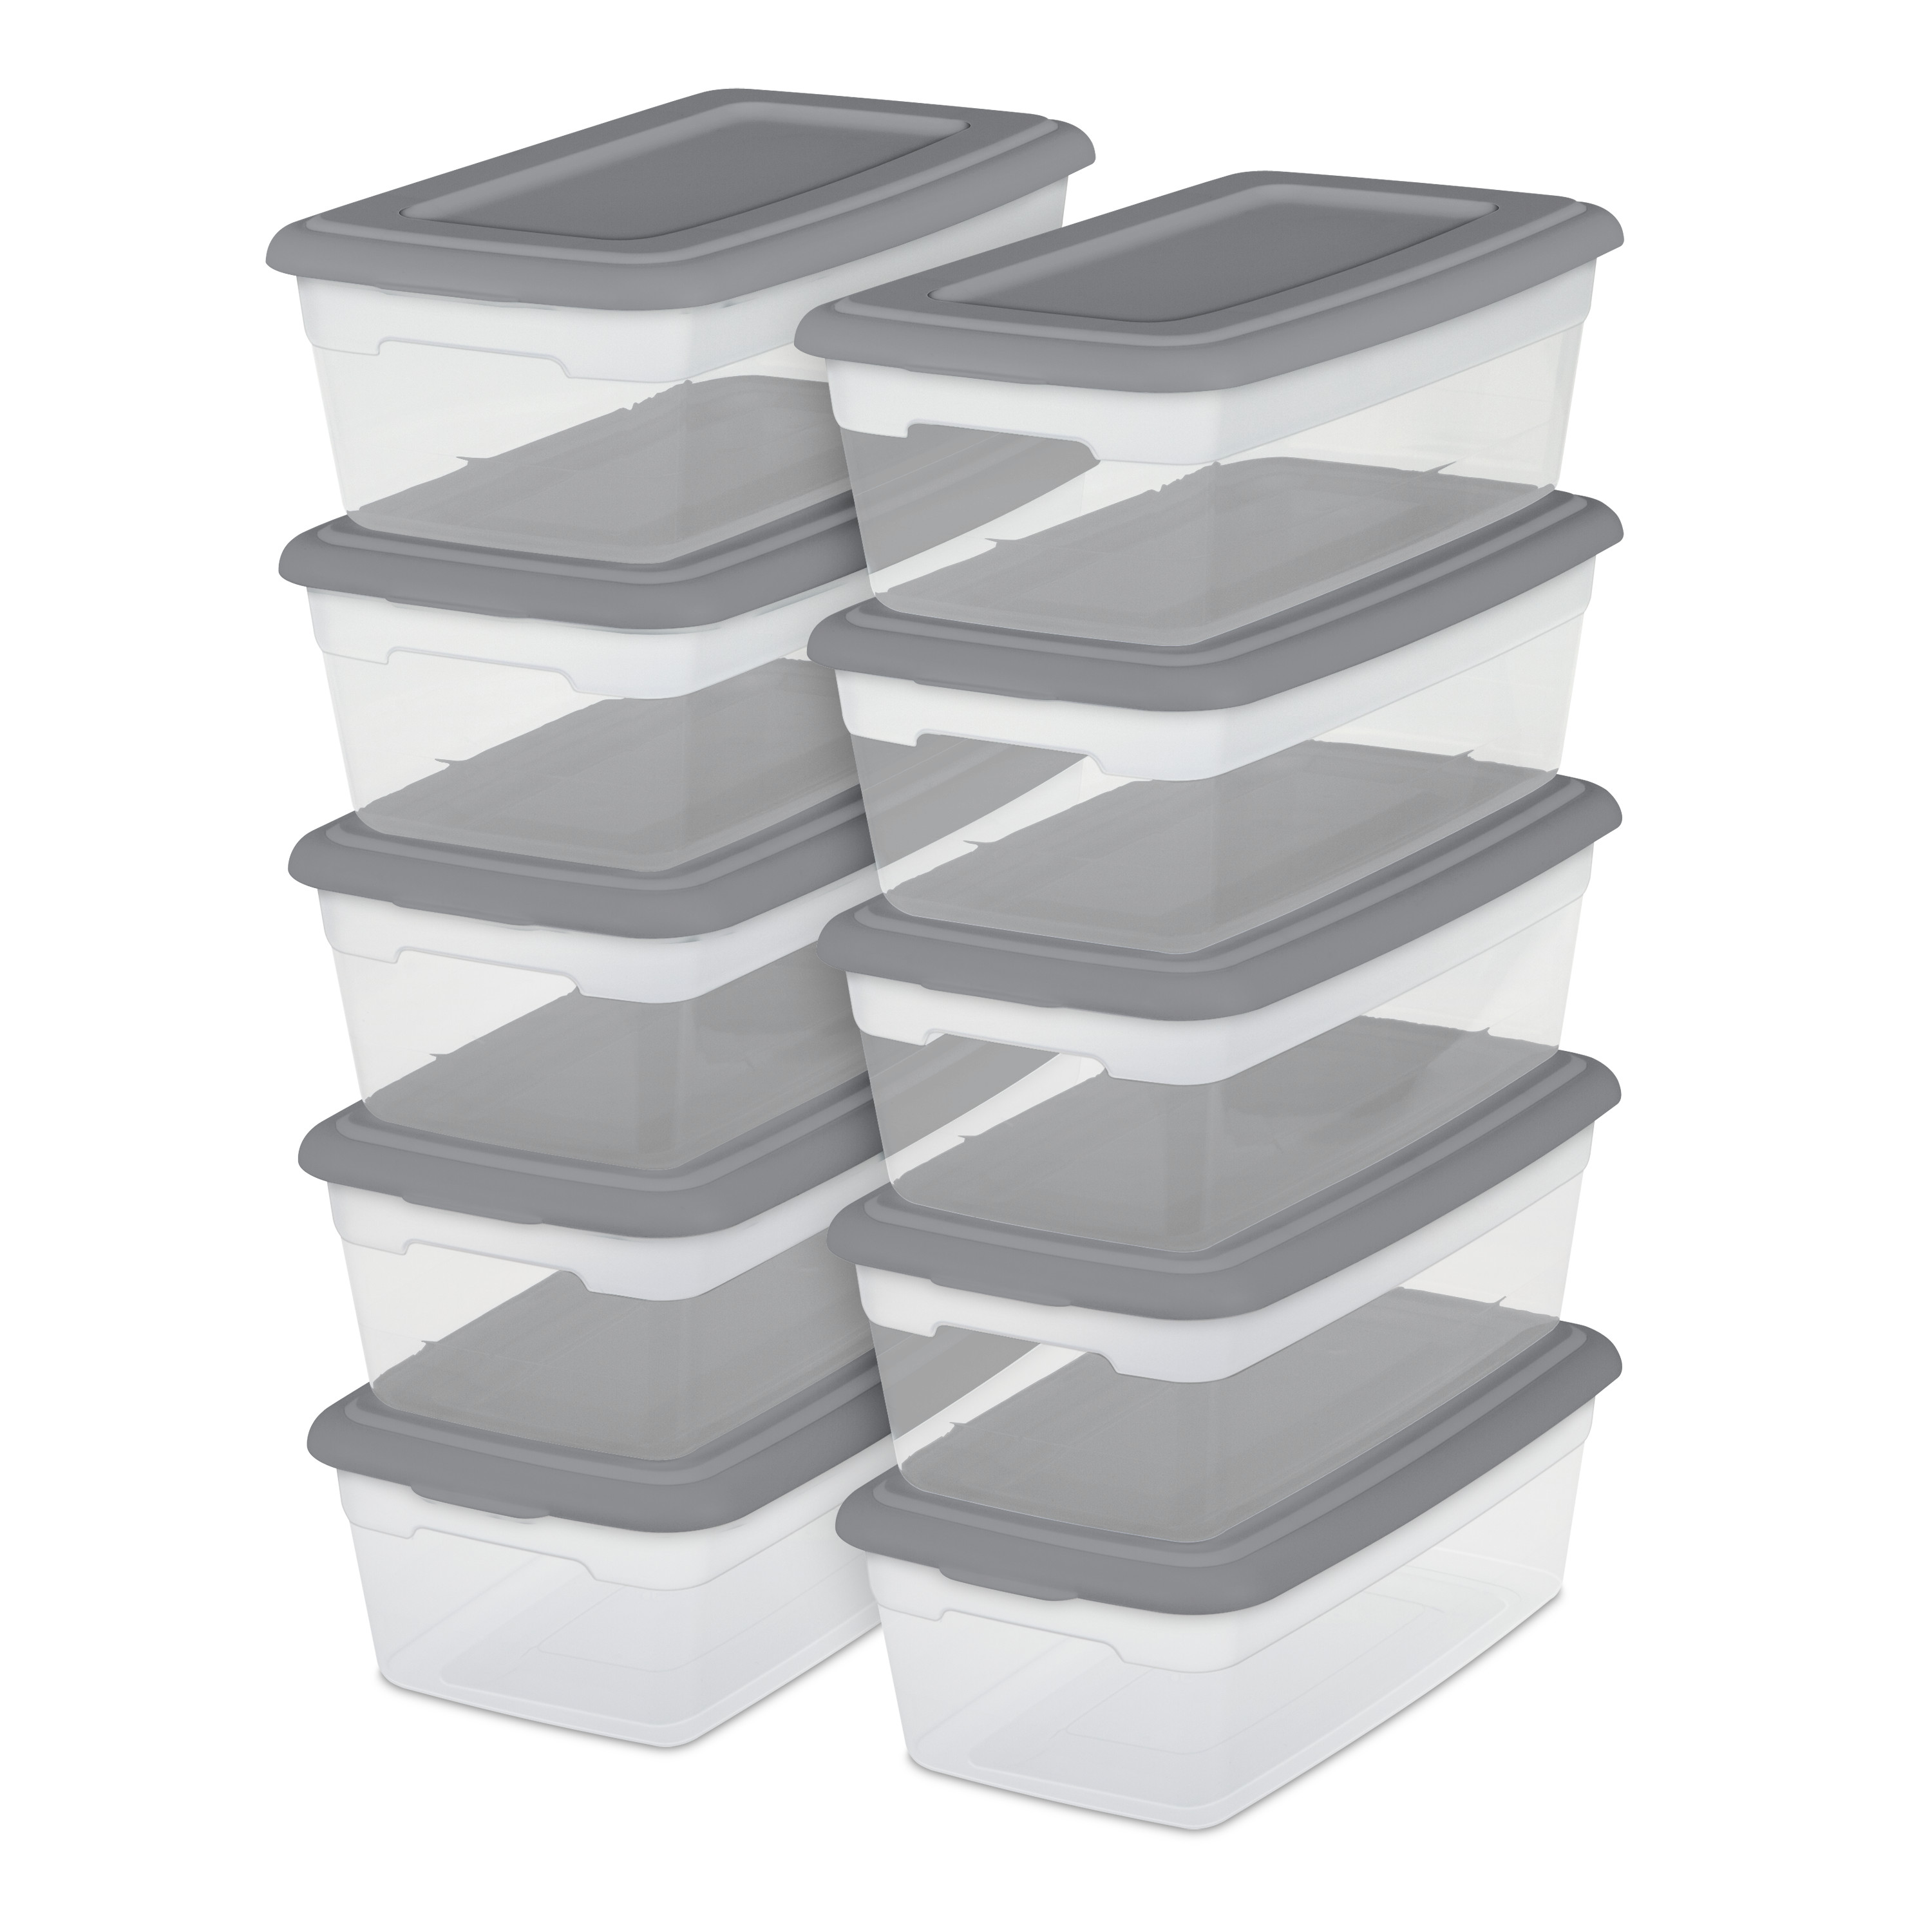 Sterilite Set of (10) 6 Qt. Clear Plastic Storage Boxes with Gray Lids - image 1 of 8